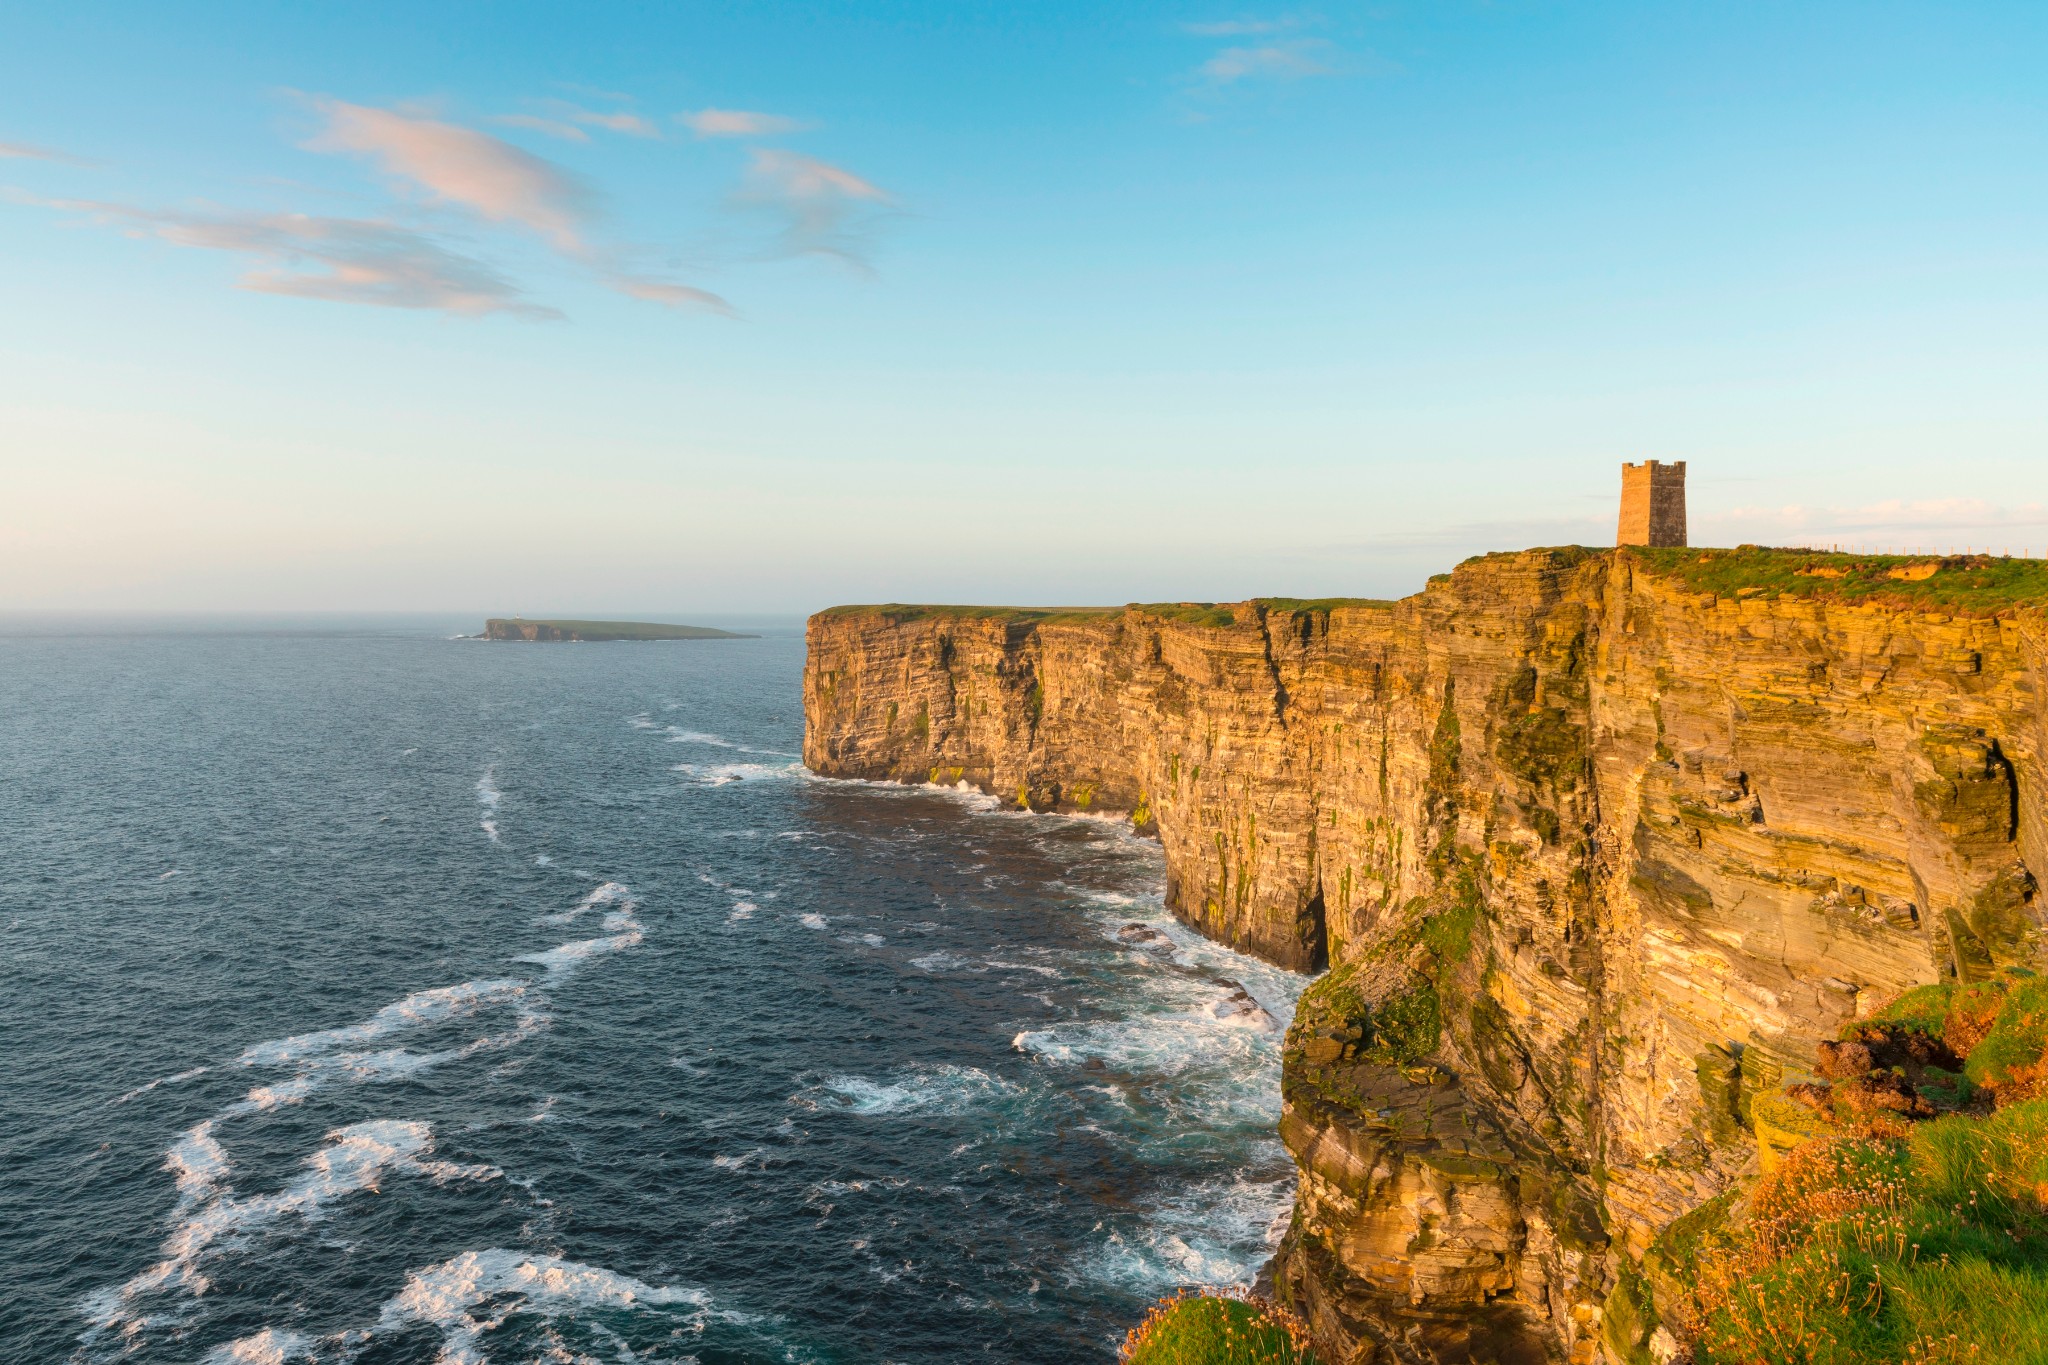 Marwick Head, Orkney - image by Kenny Lam/VisitScotland